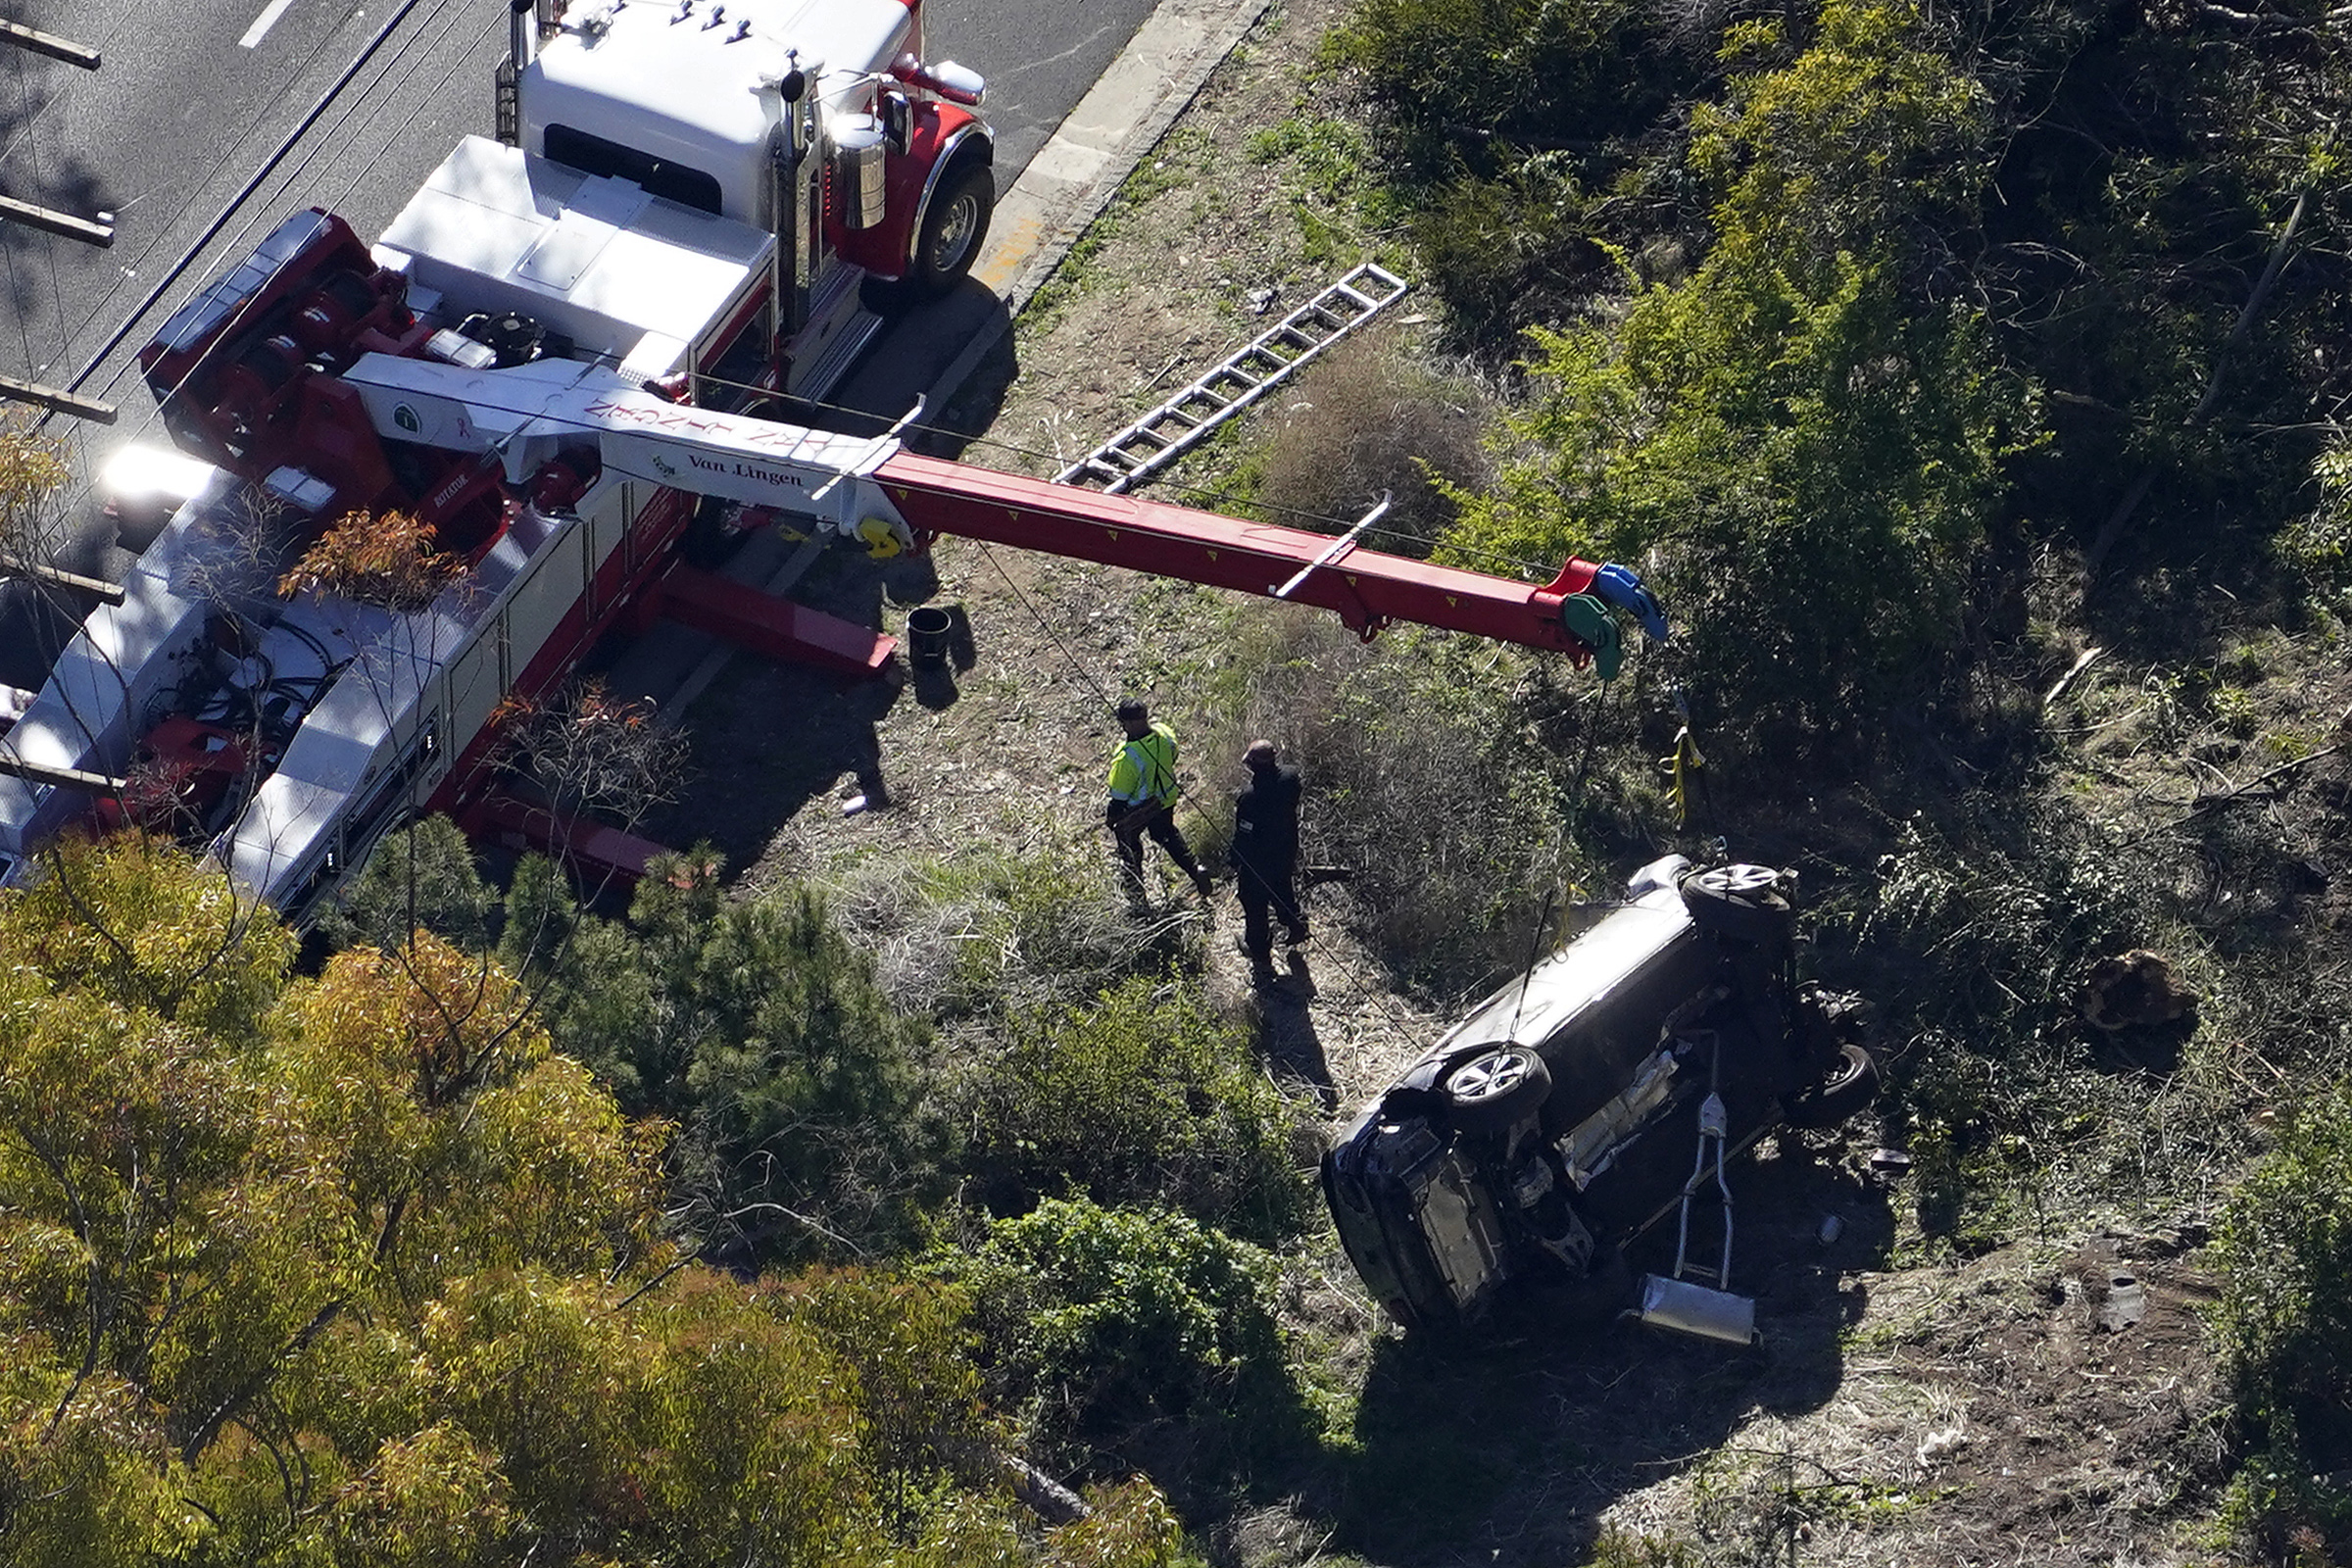 A crane is used to lift a vehicle following a rollover accident involving golfer Tiger Woods in Rancho Palos Verdes, Calif., on Feb. 23, 2021. (Mark J. Terrill—AP)